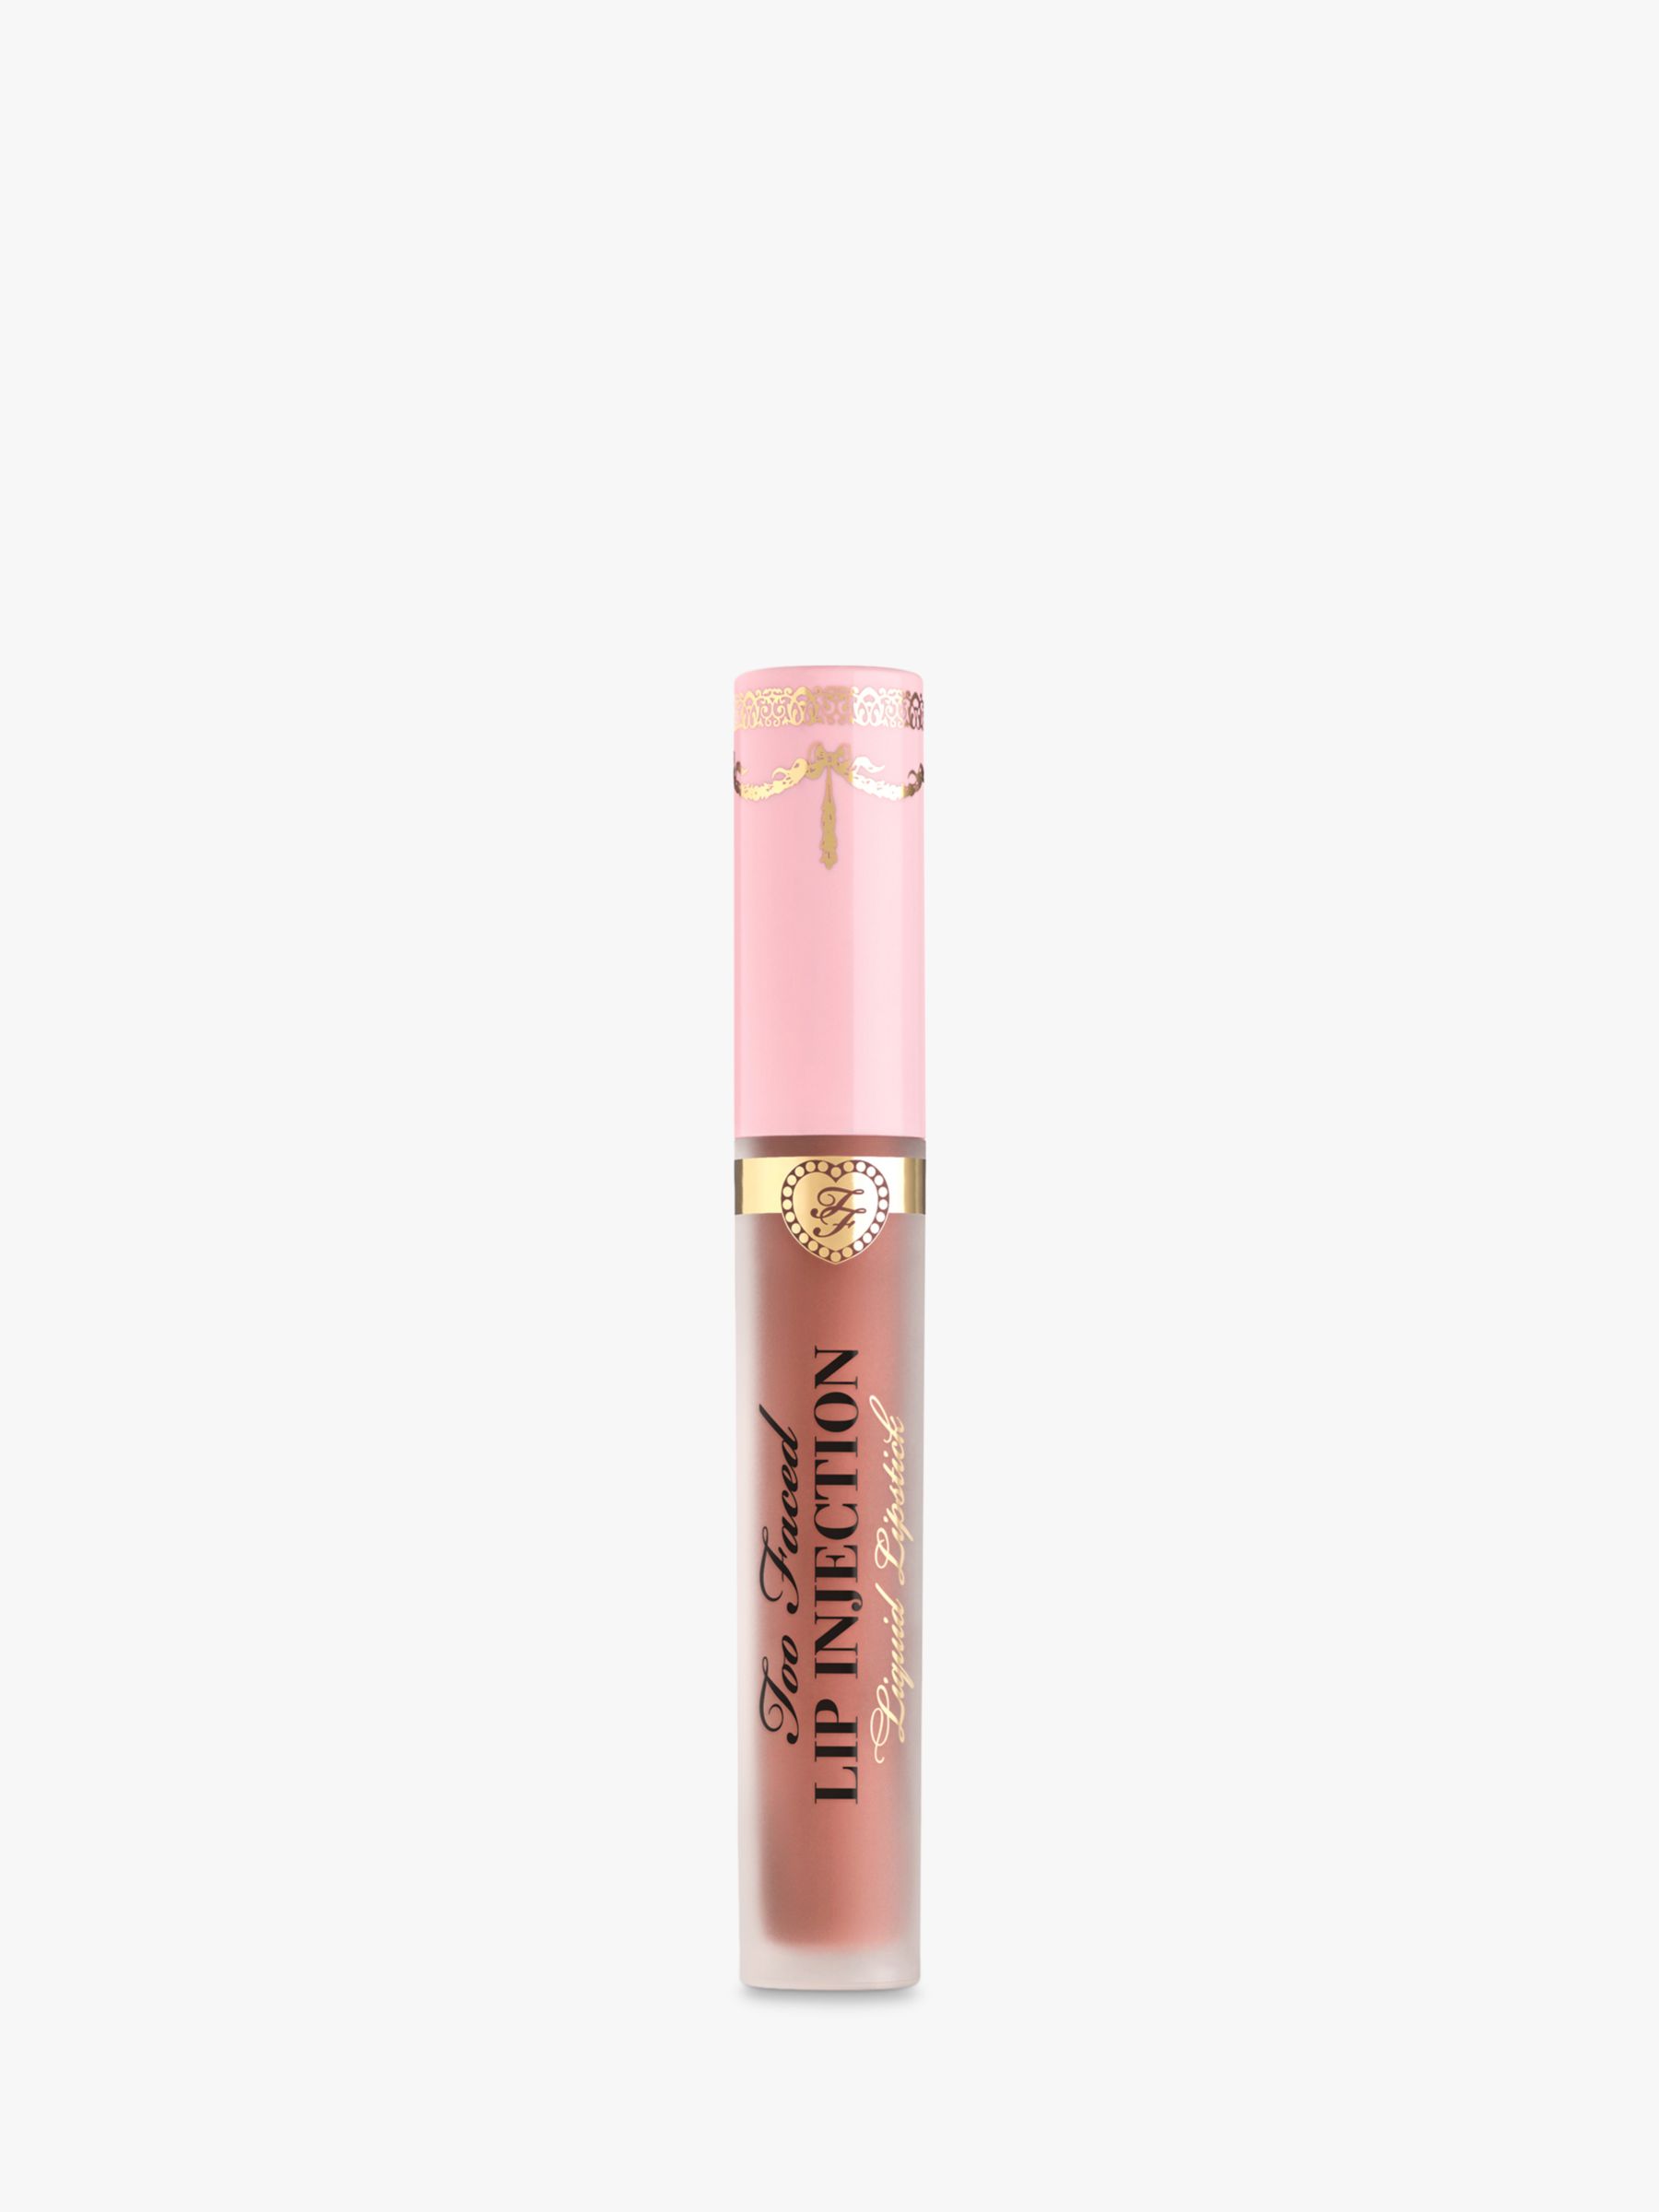 Too Faced Lip Injection Power Plumping Liquid Lipstick, Give 'Em Lip 2